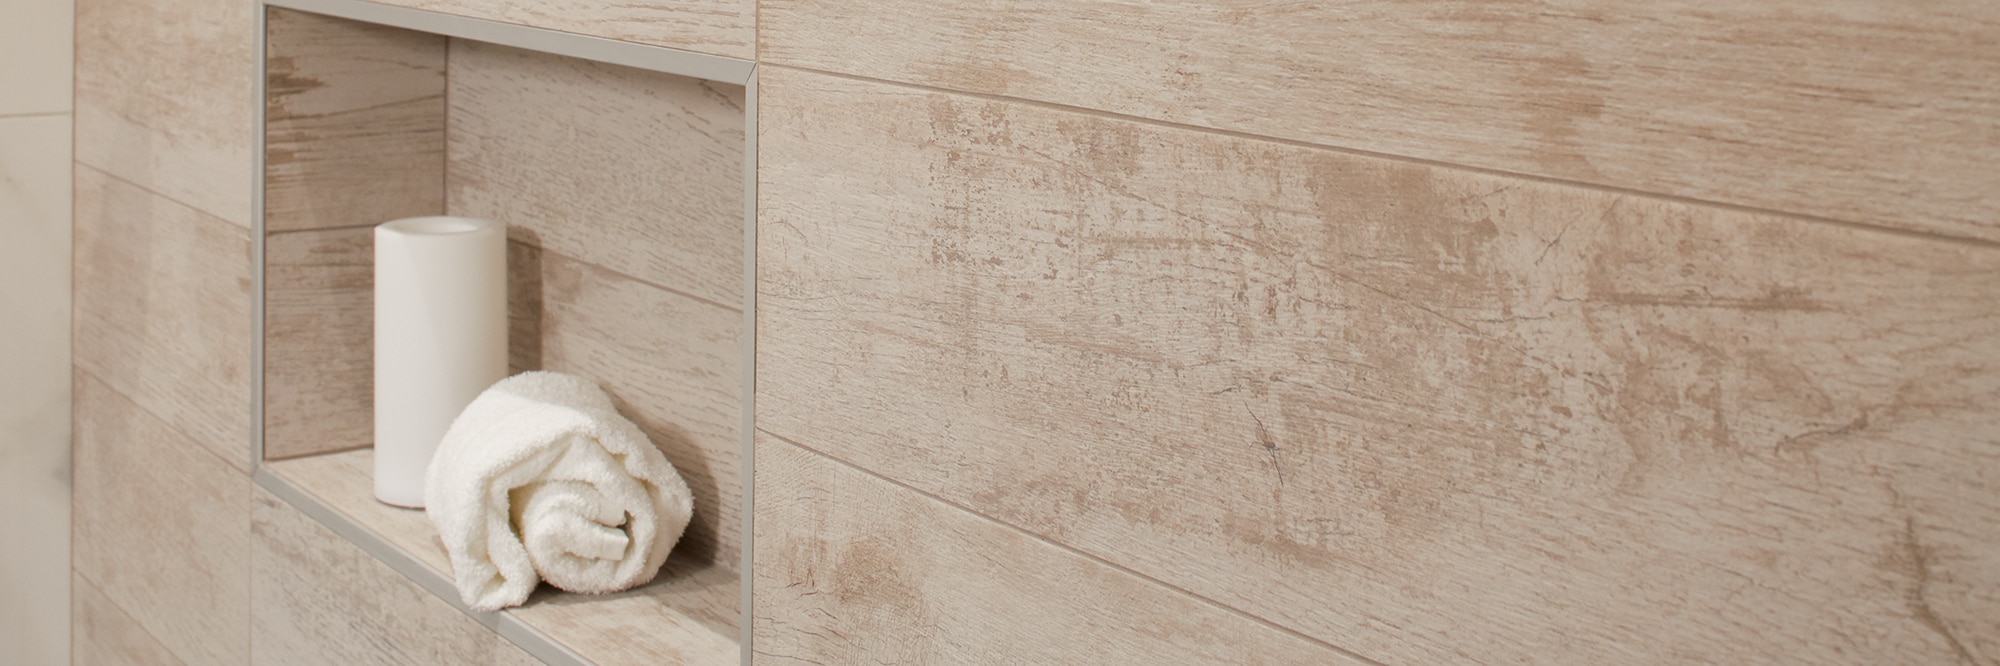 Closeup of shower wall tile that looks like white-washed wood with shower niche holding a rolled up towel.